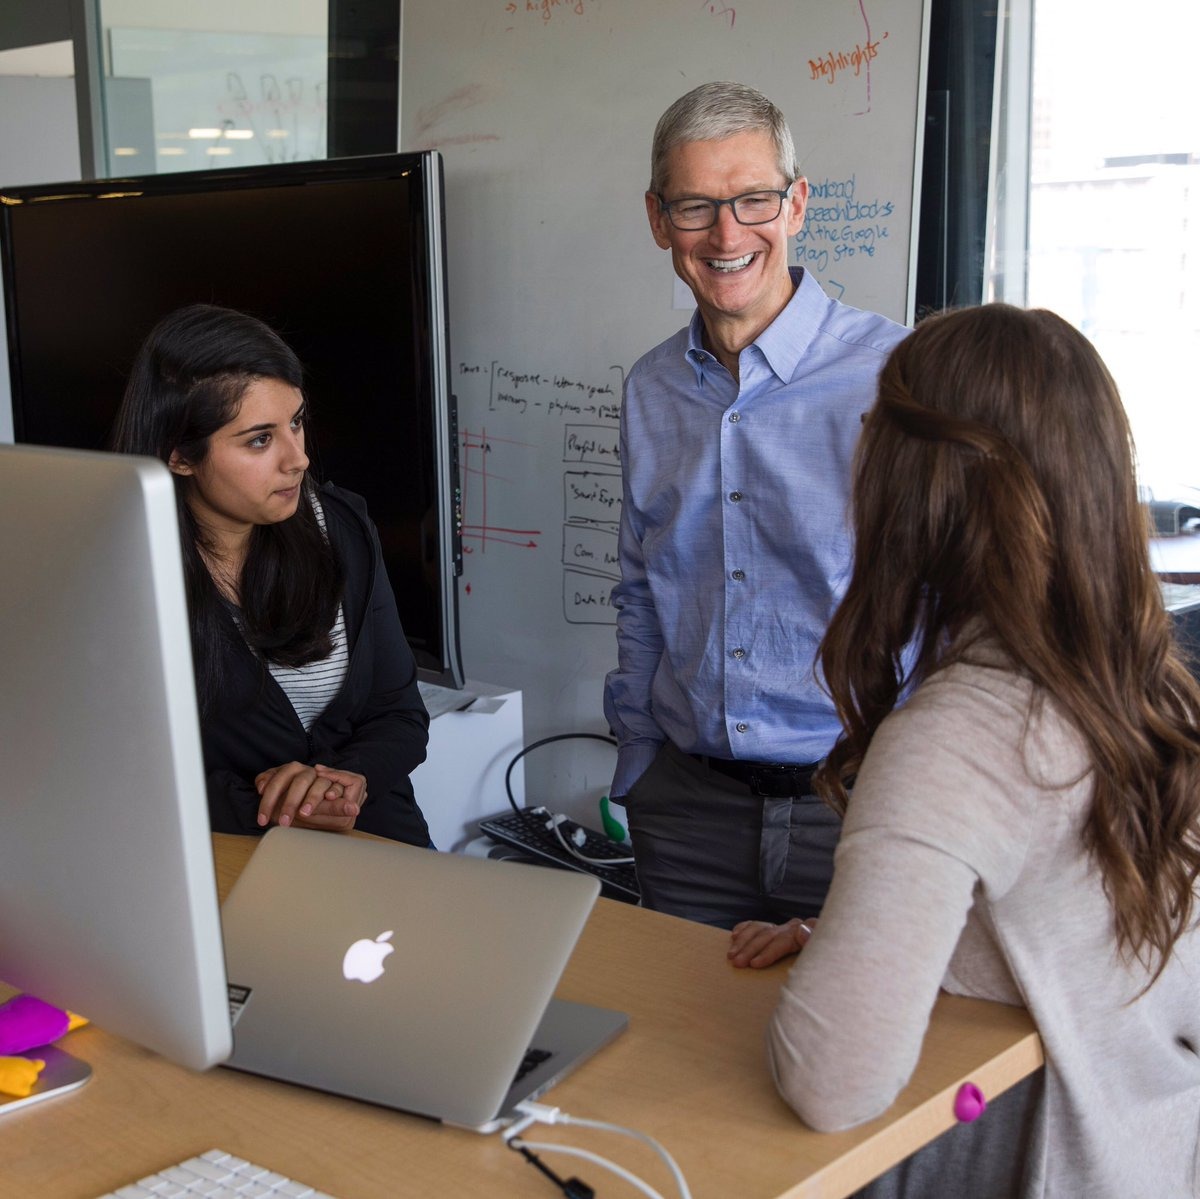 Apple Ceo Tim Cook Shares Photos From Mit Tour Ahead Of Commencement